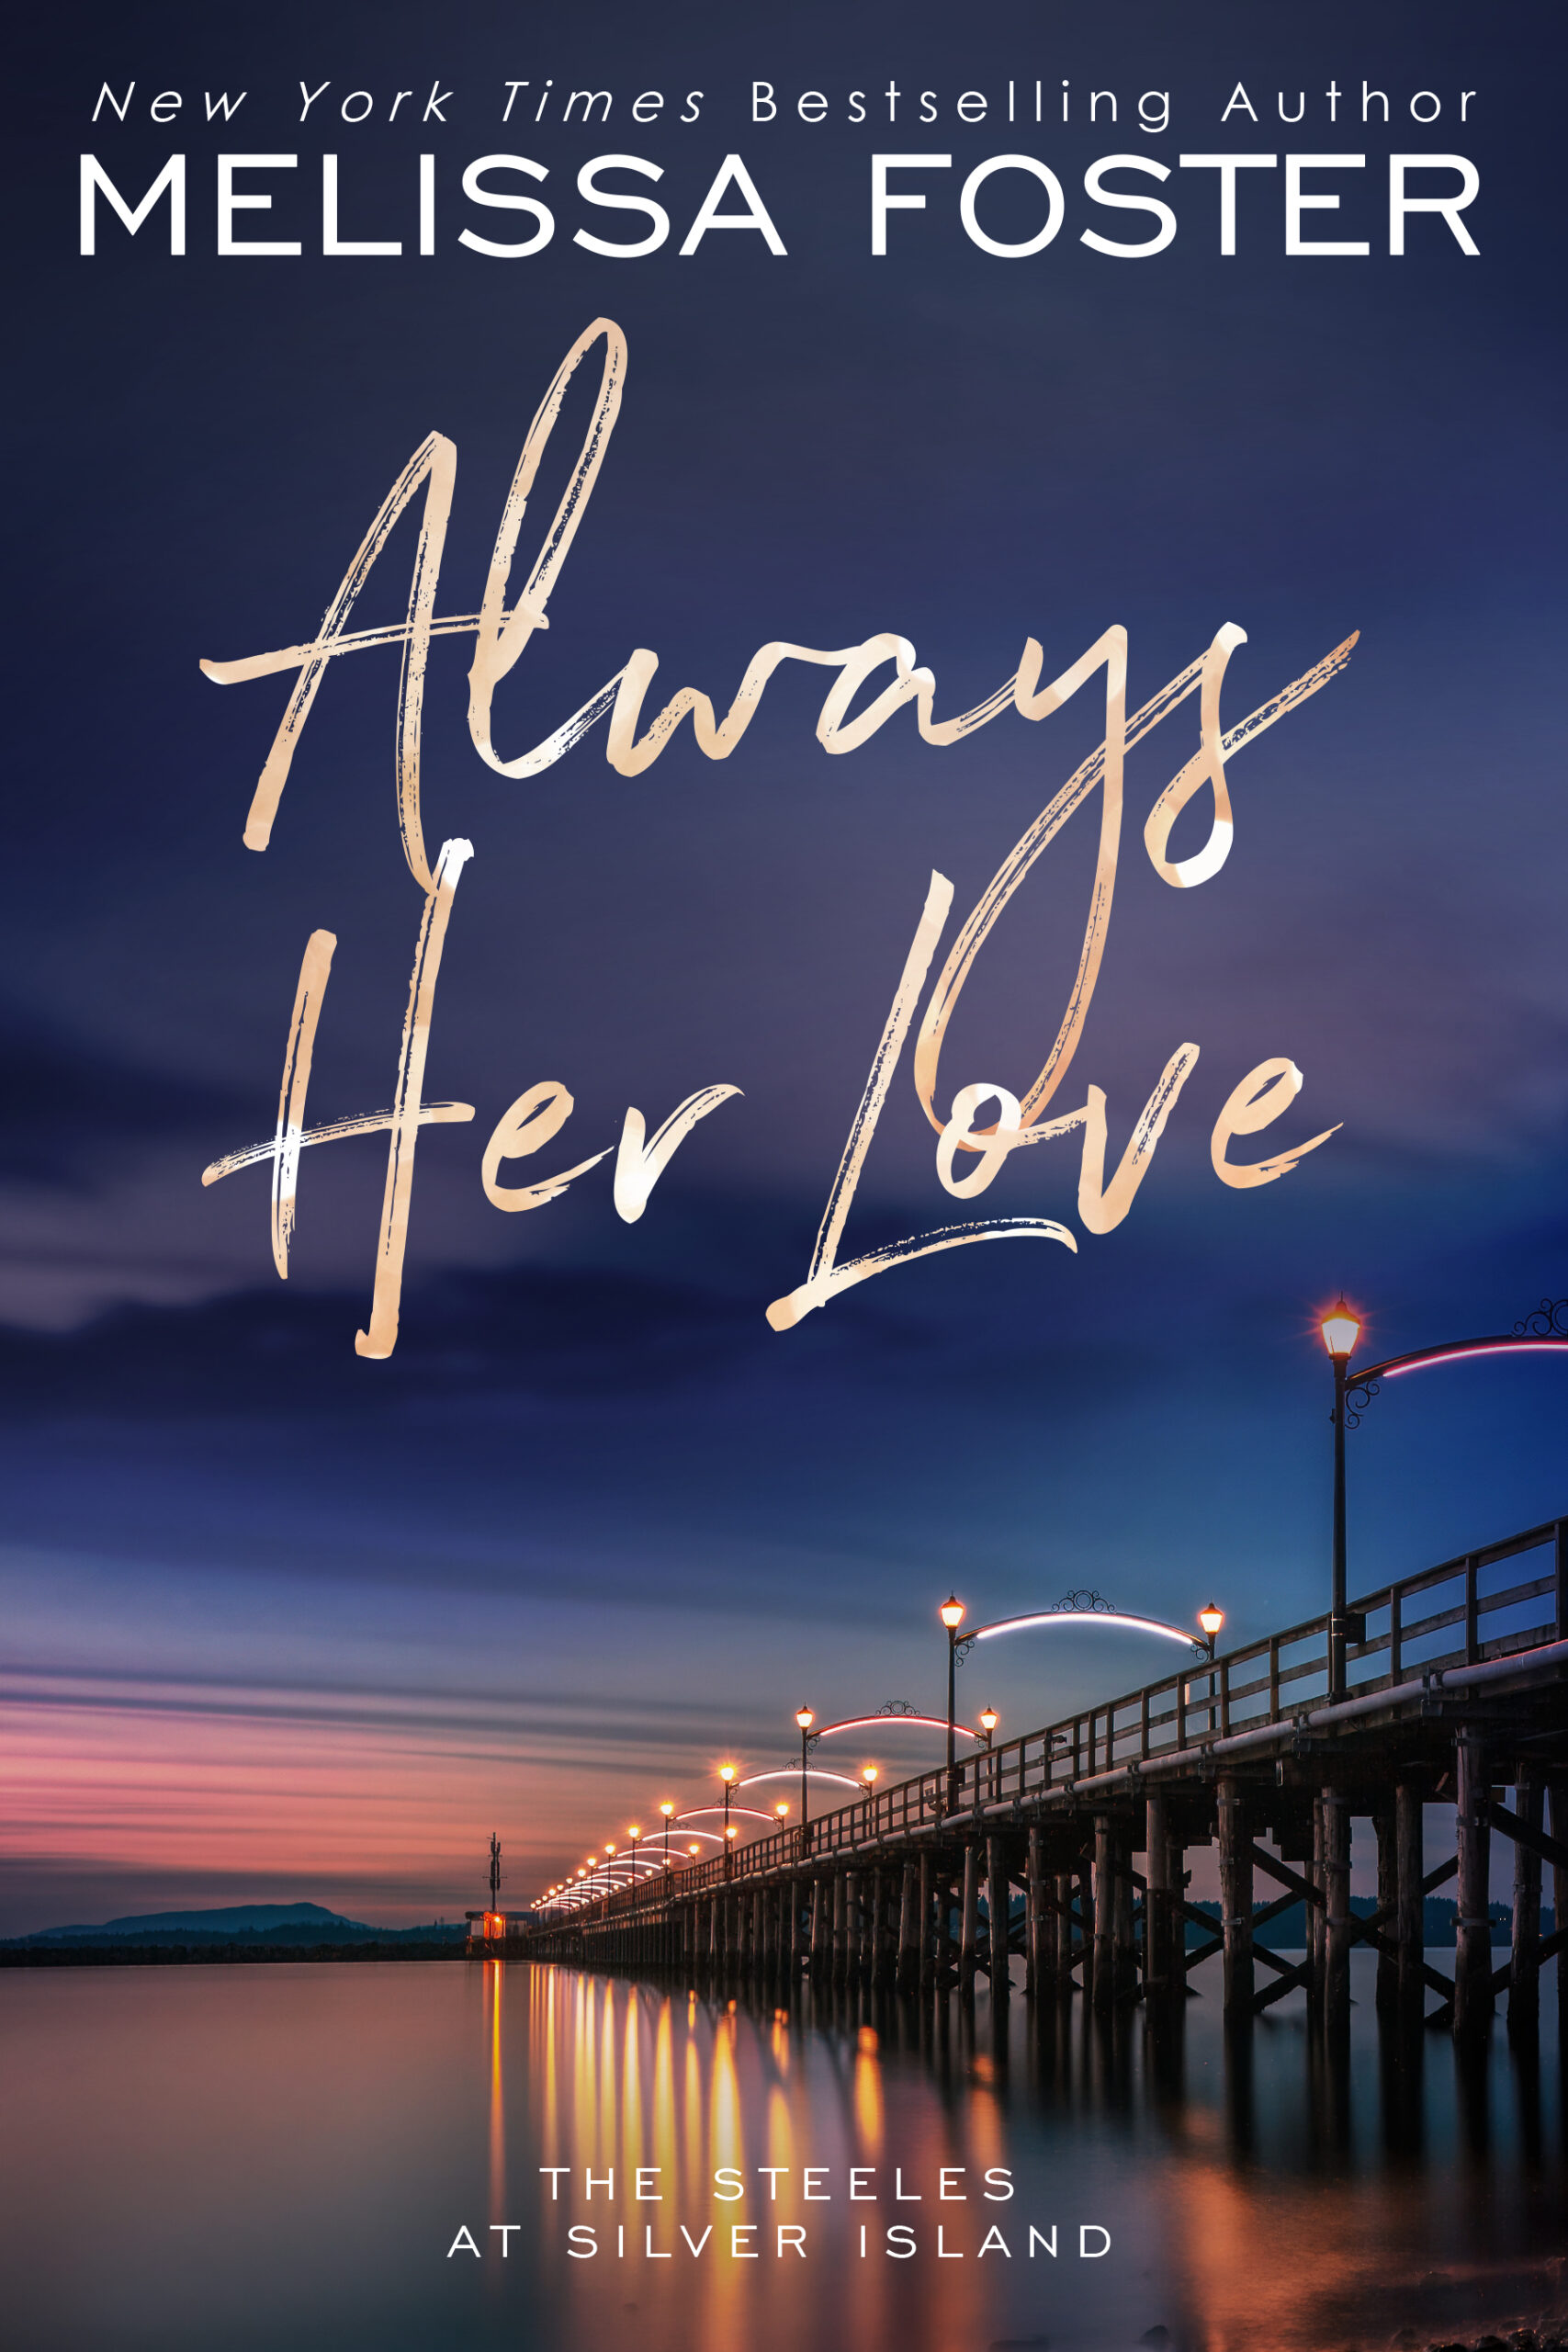 Always Her Love Special Edition Paperback by Melissa Foster